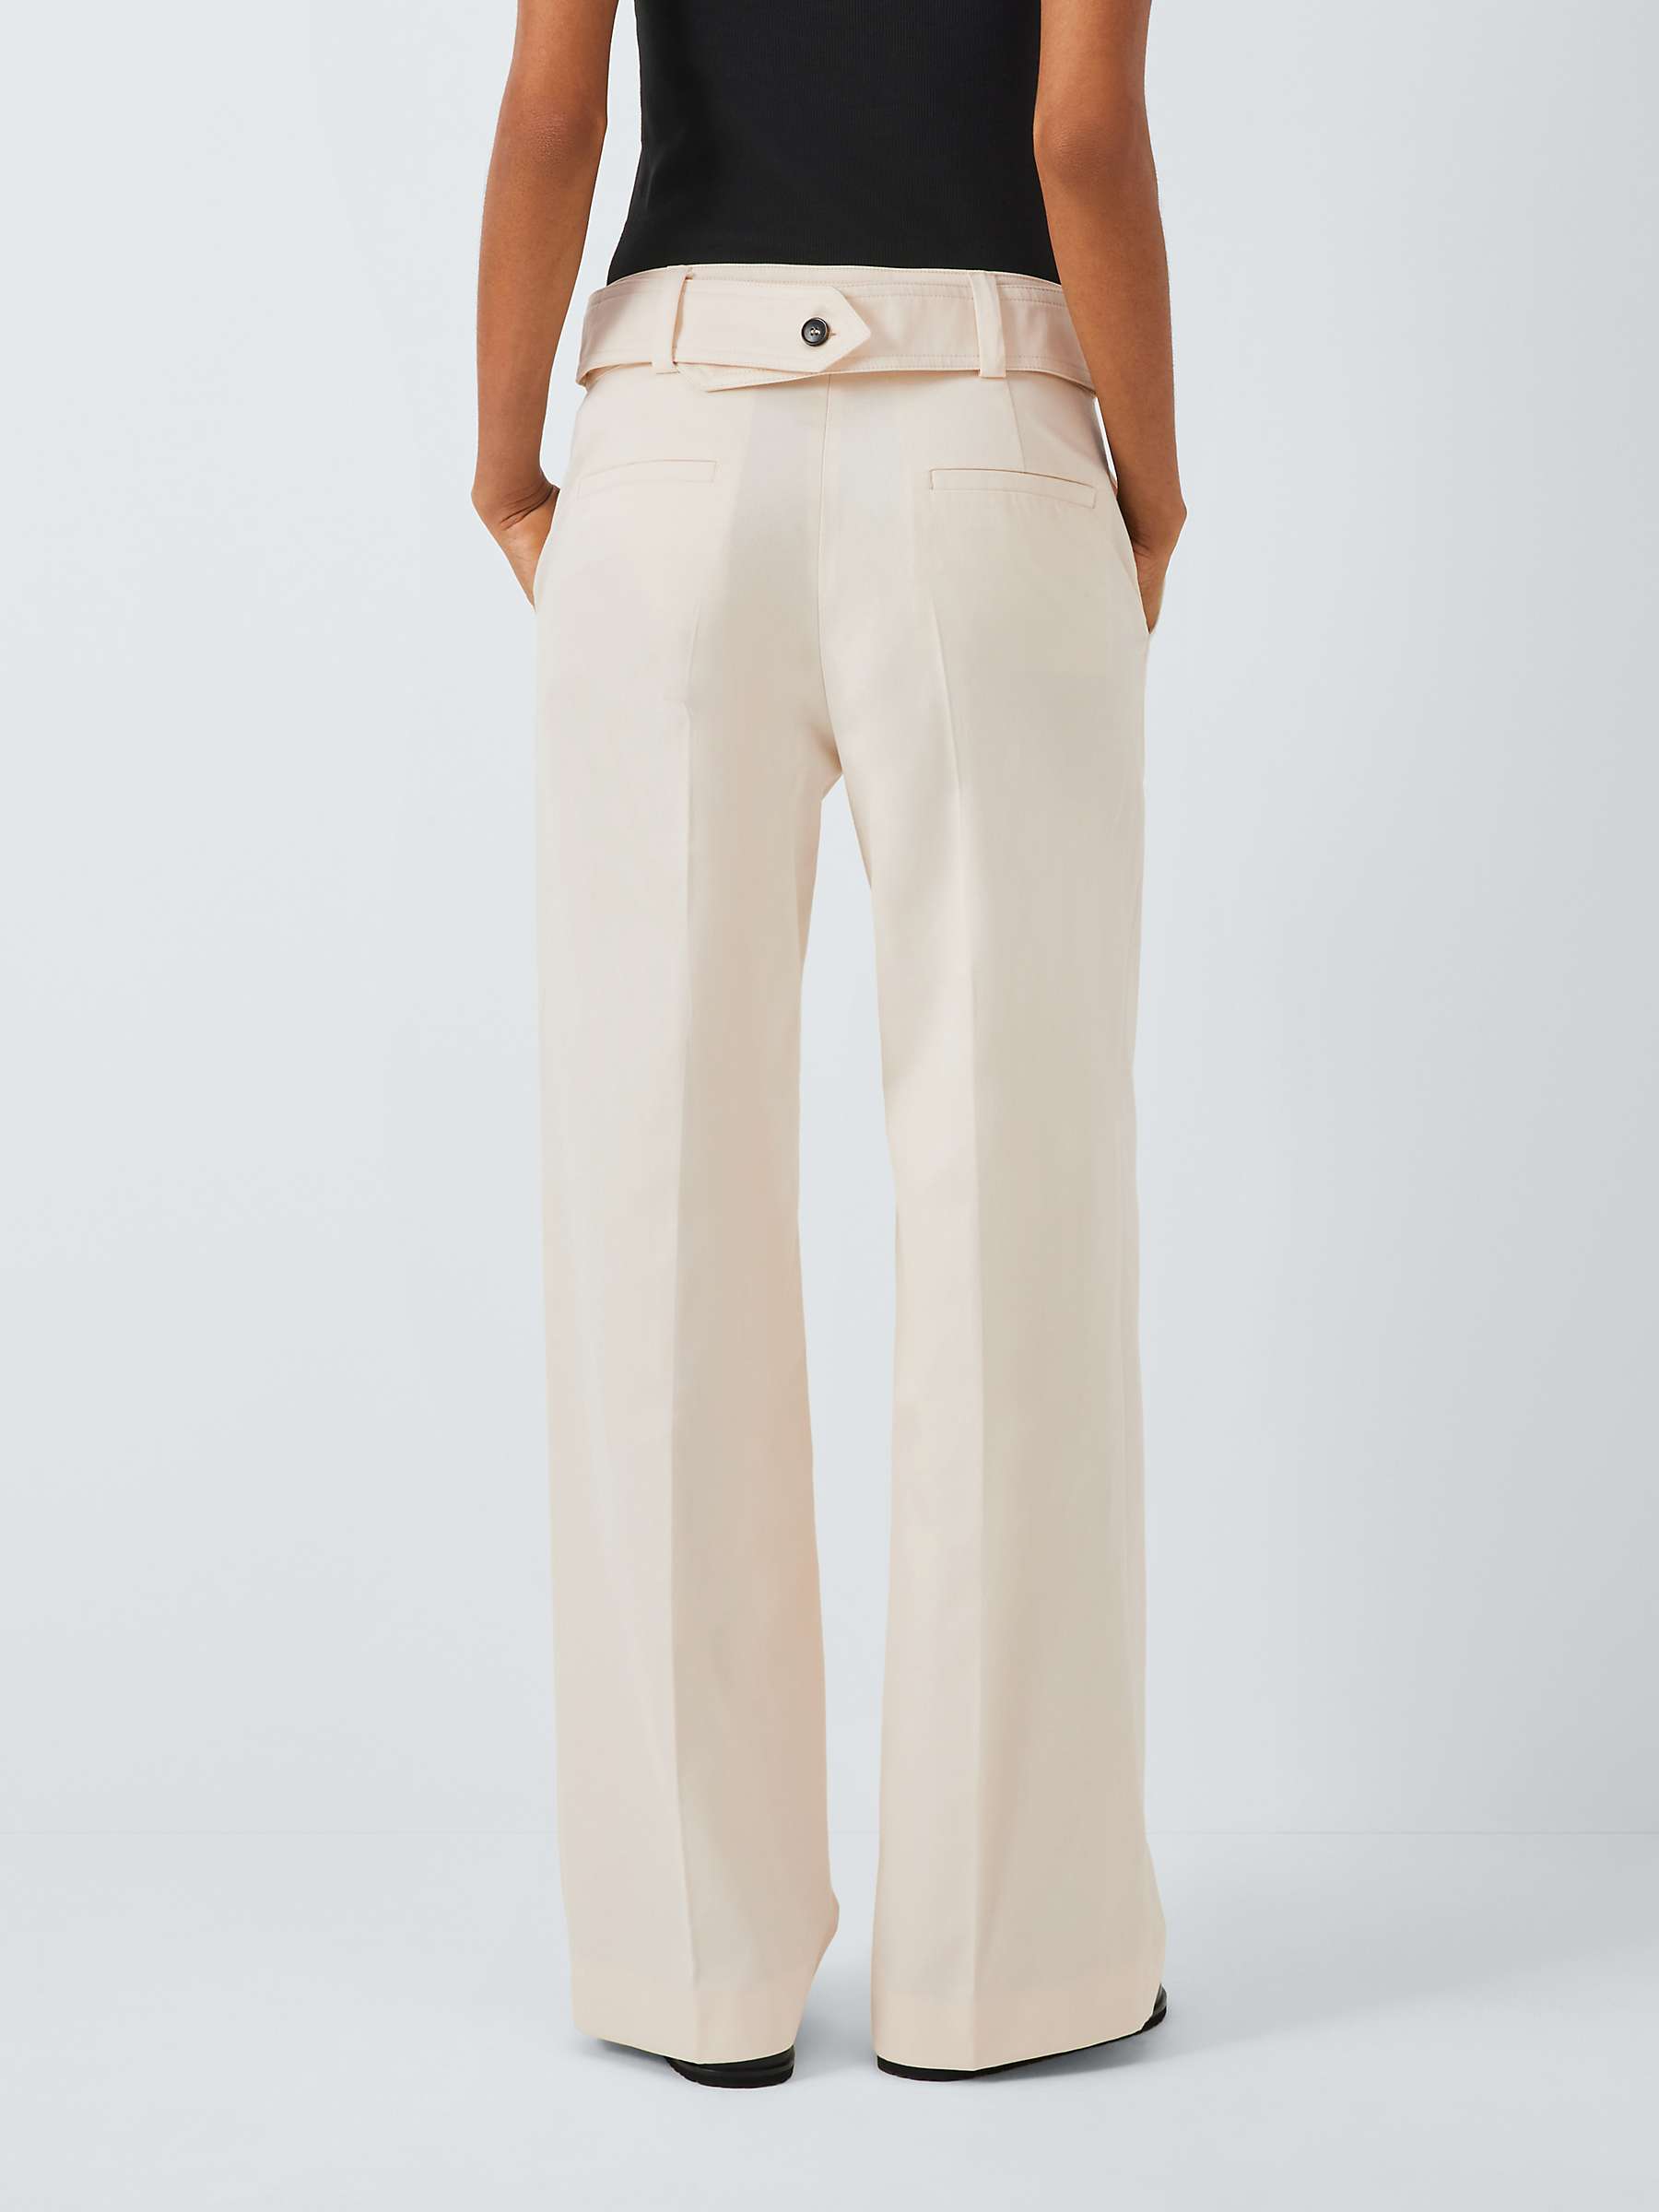 Buy Weekend MaxMara Livigno Trousers, Ivory Online at johnlewis.com